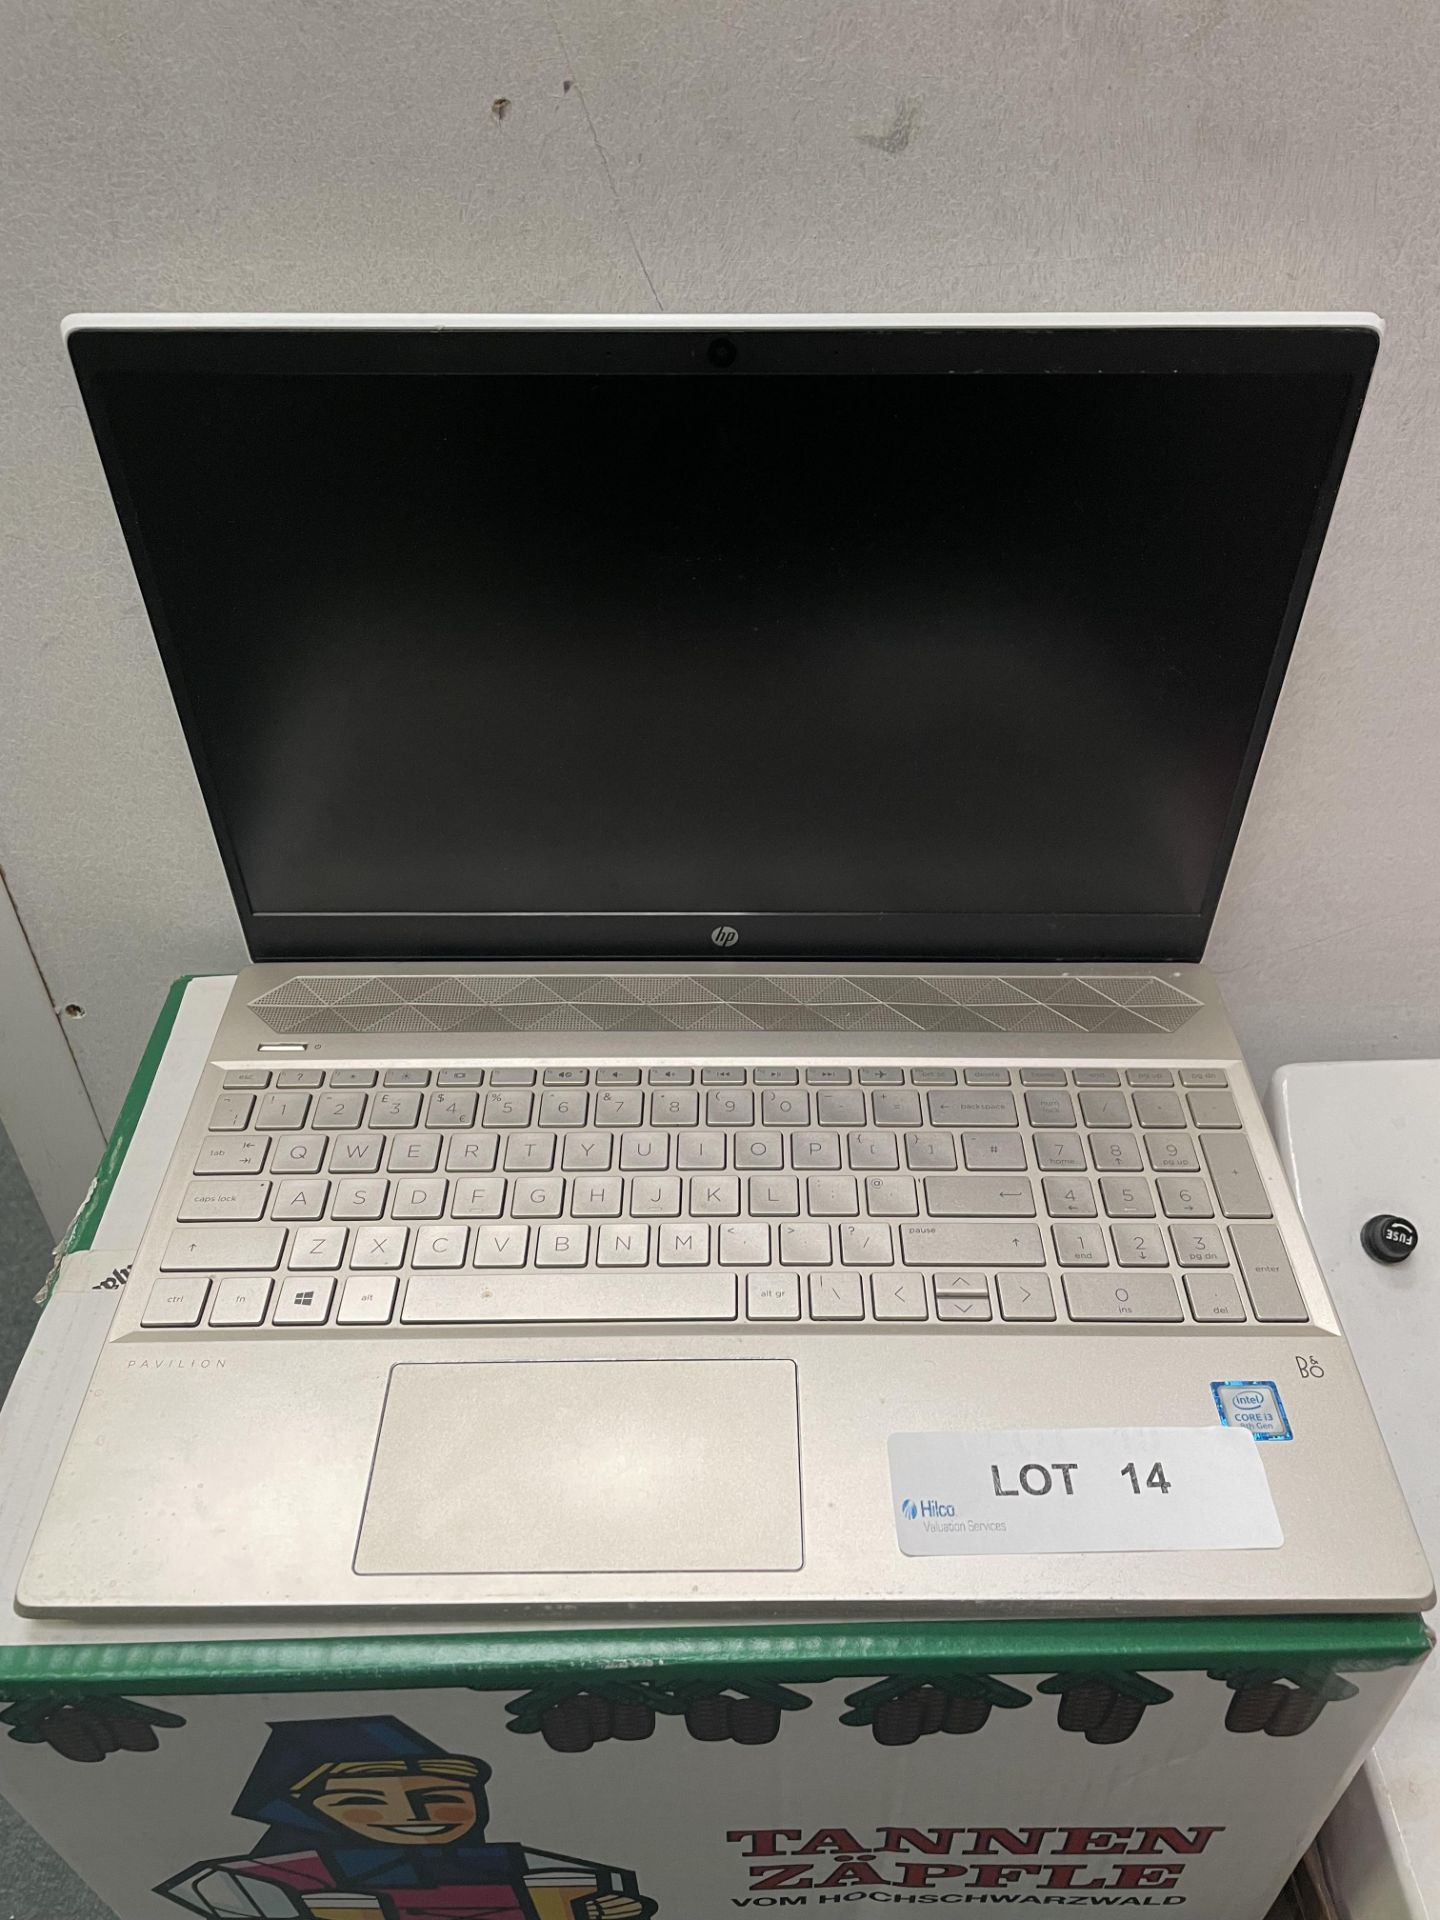 HP Pavilion, Core i3 8th Generation Laptop. (No Power Cable), Serial Number 5CD8380K7M